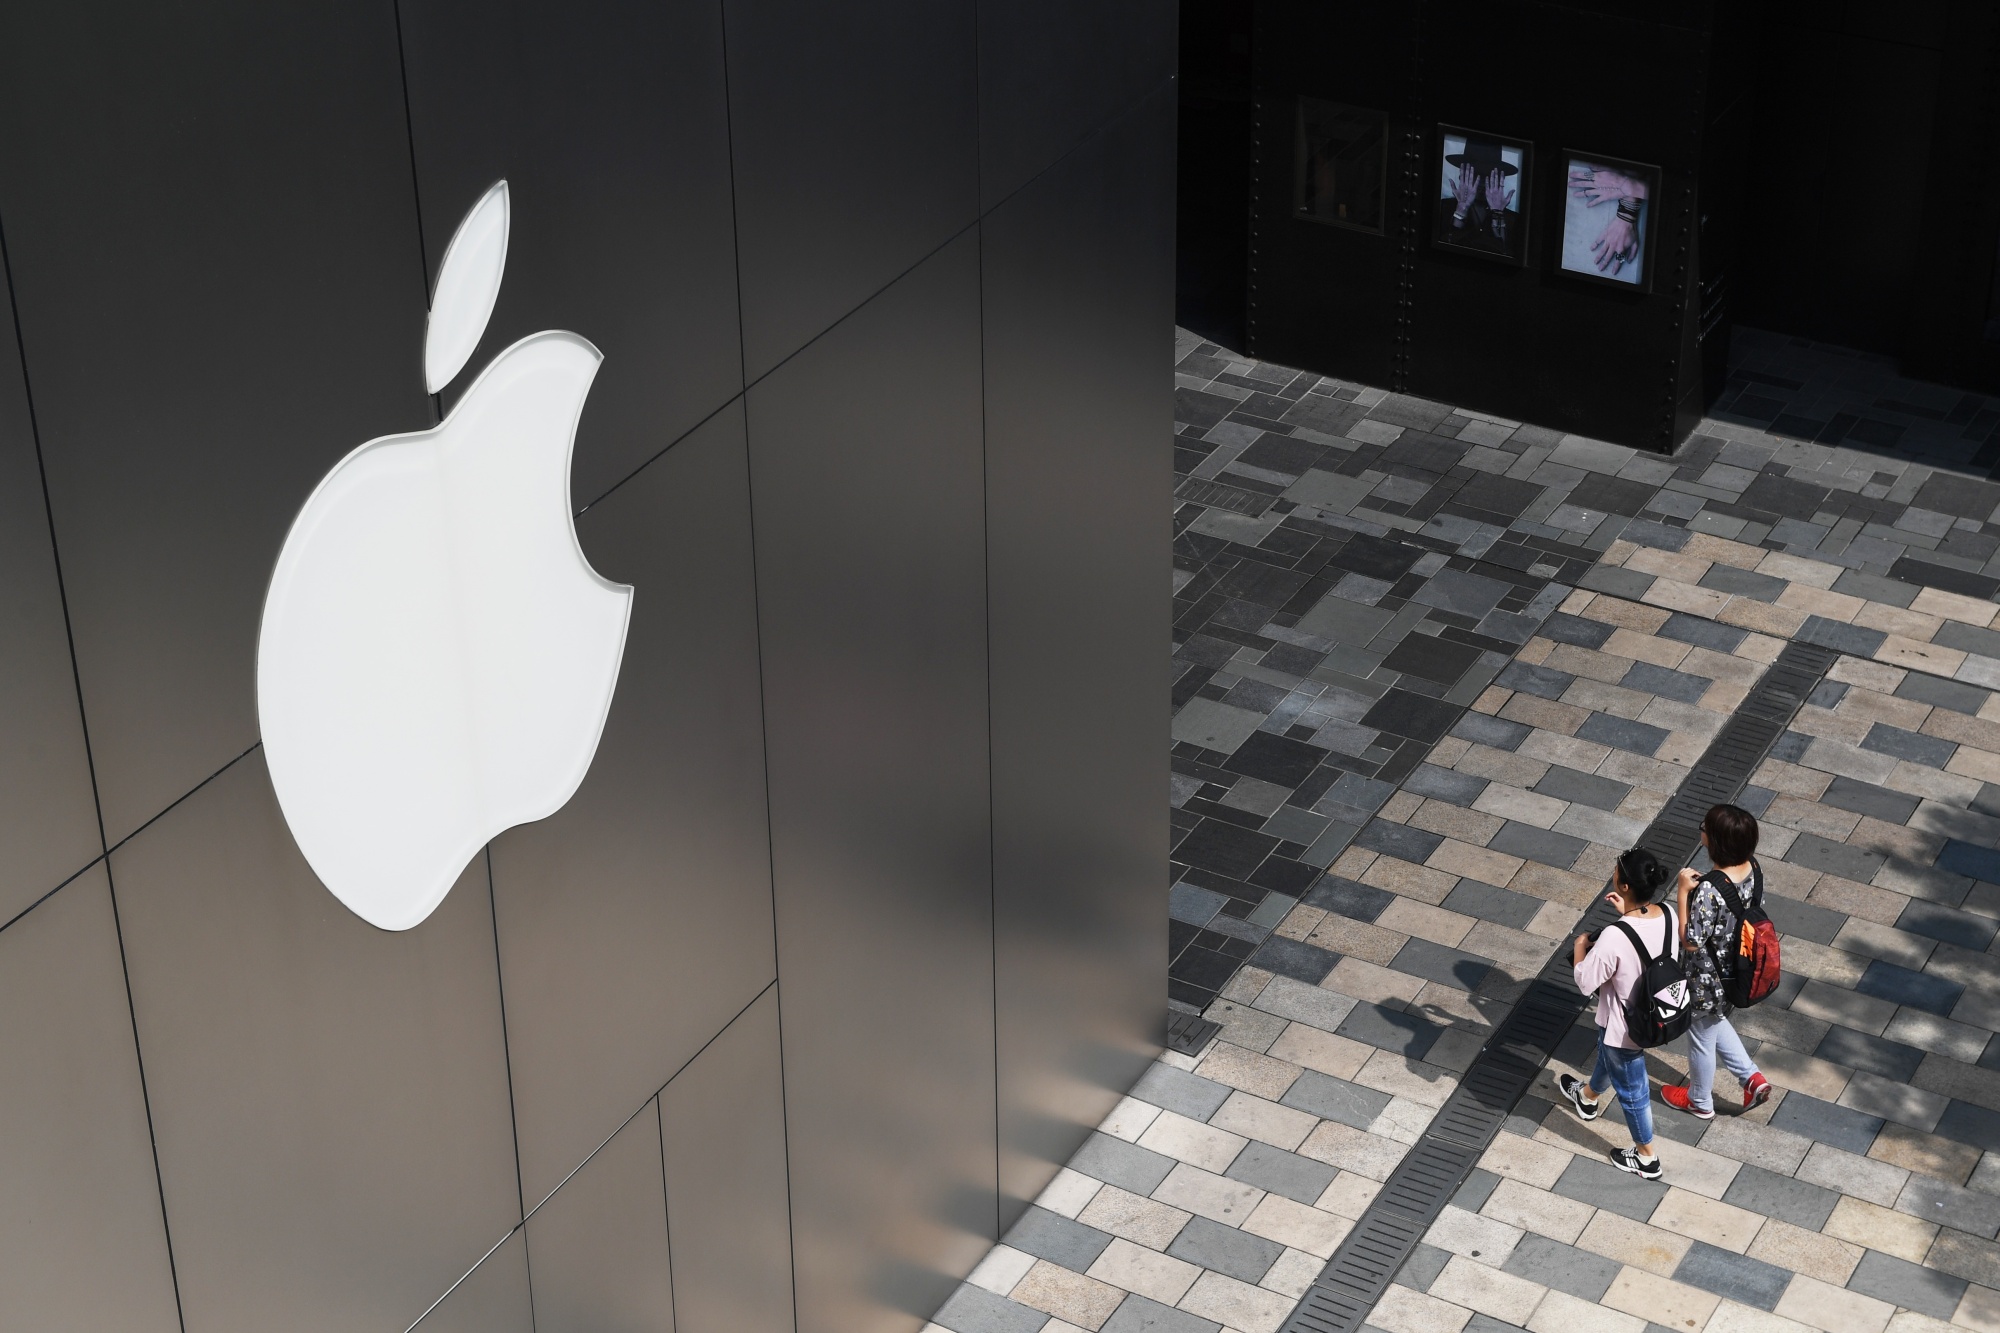 Antitrust enforcers allege that Apple has imposed software and hardware limitations on its products to impede rivals from effectively competing.